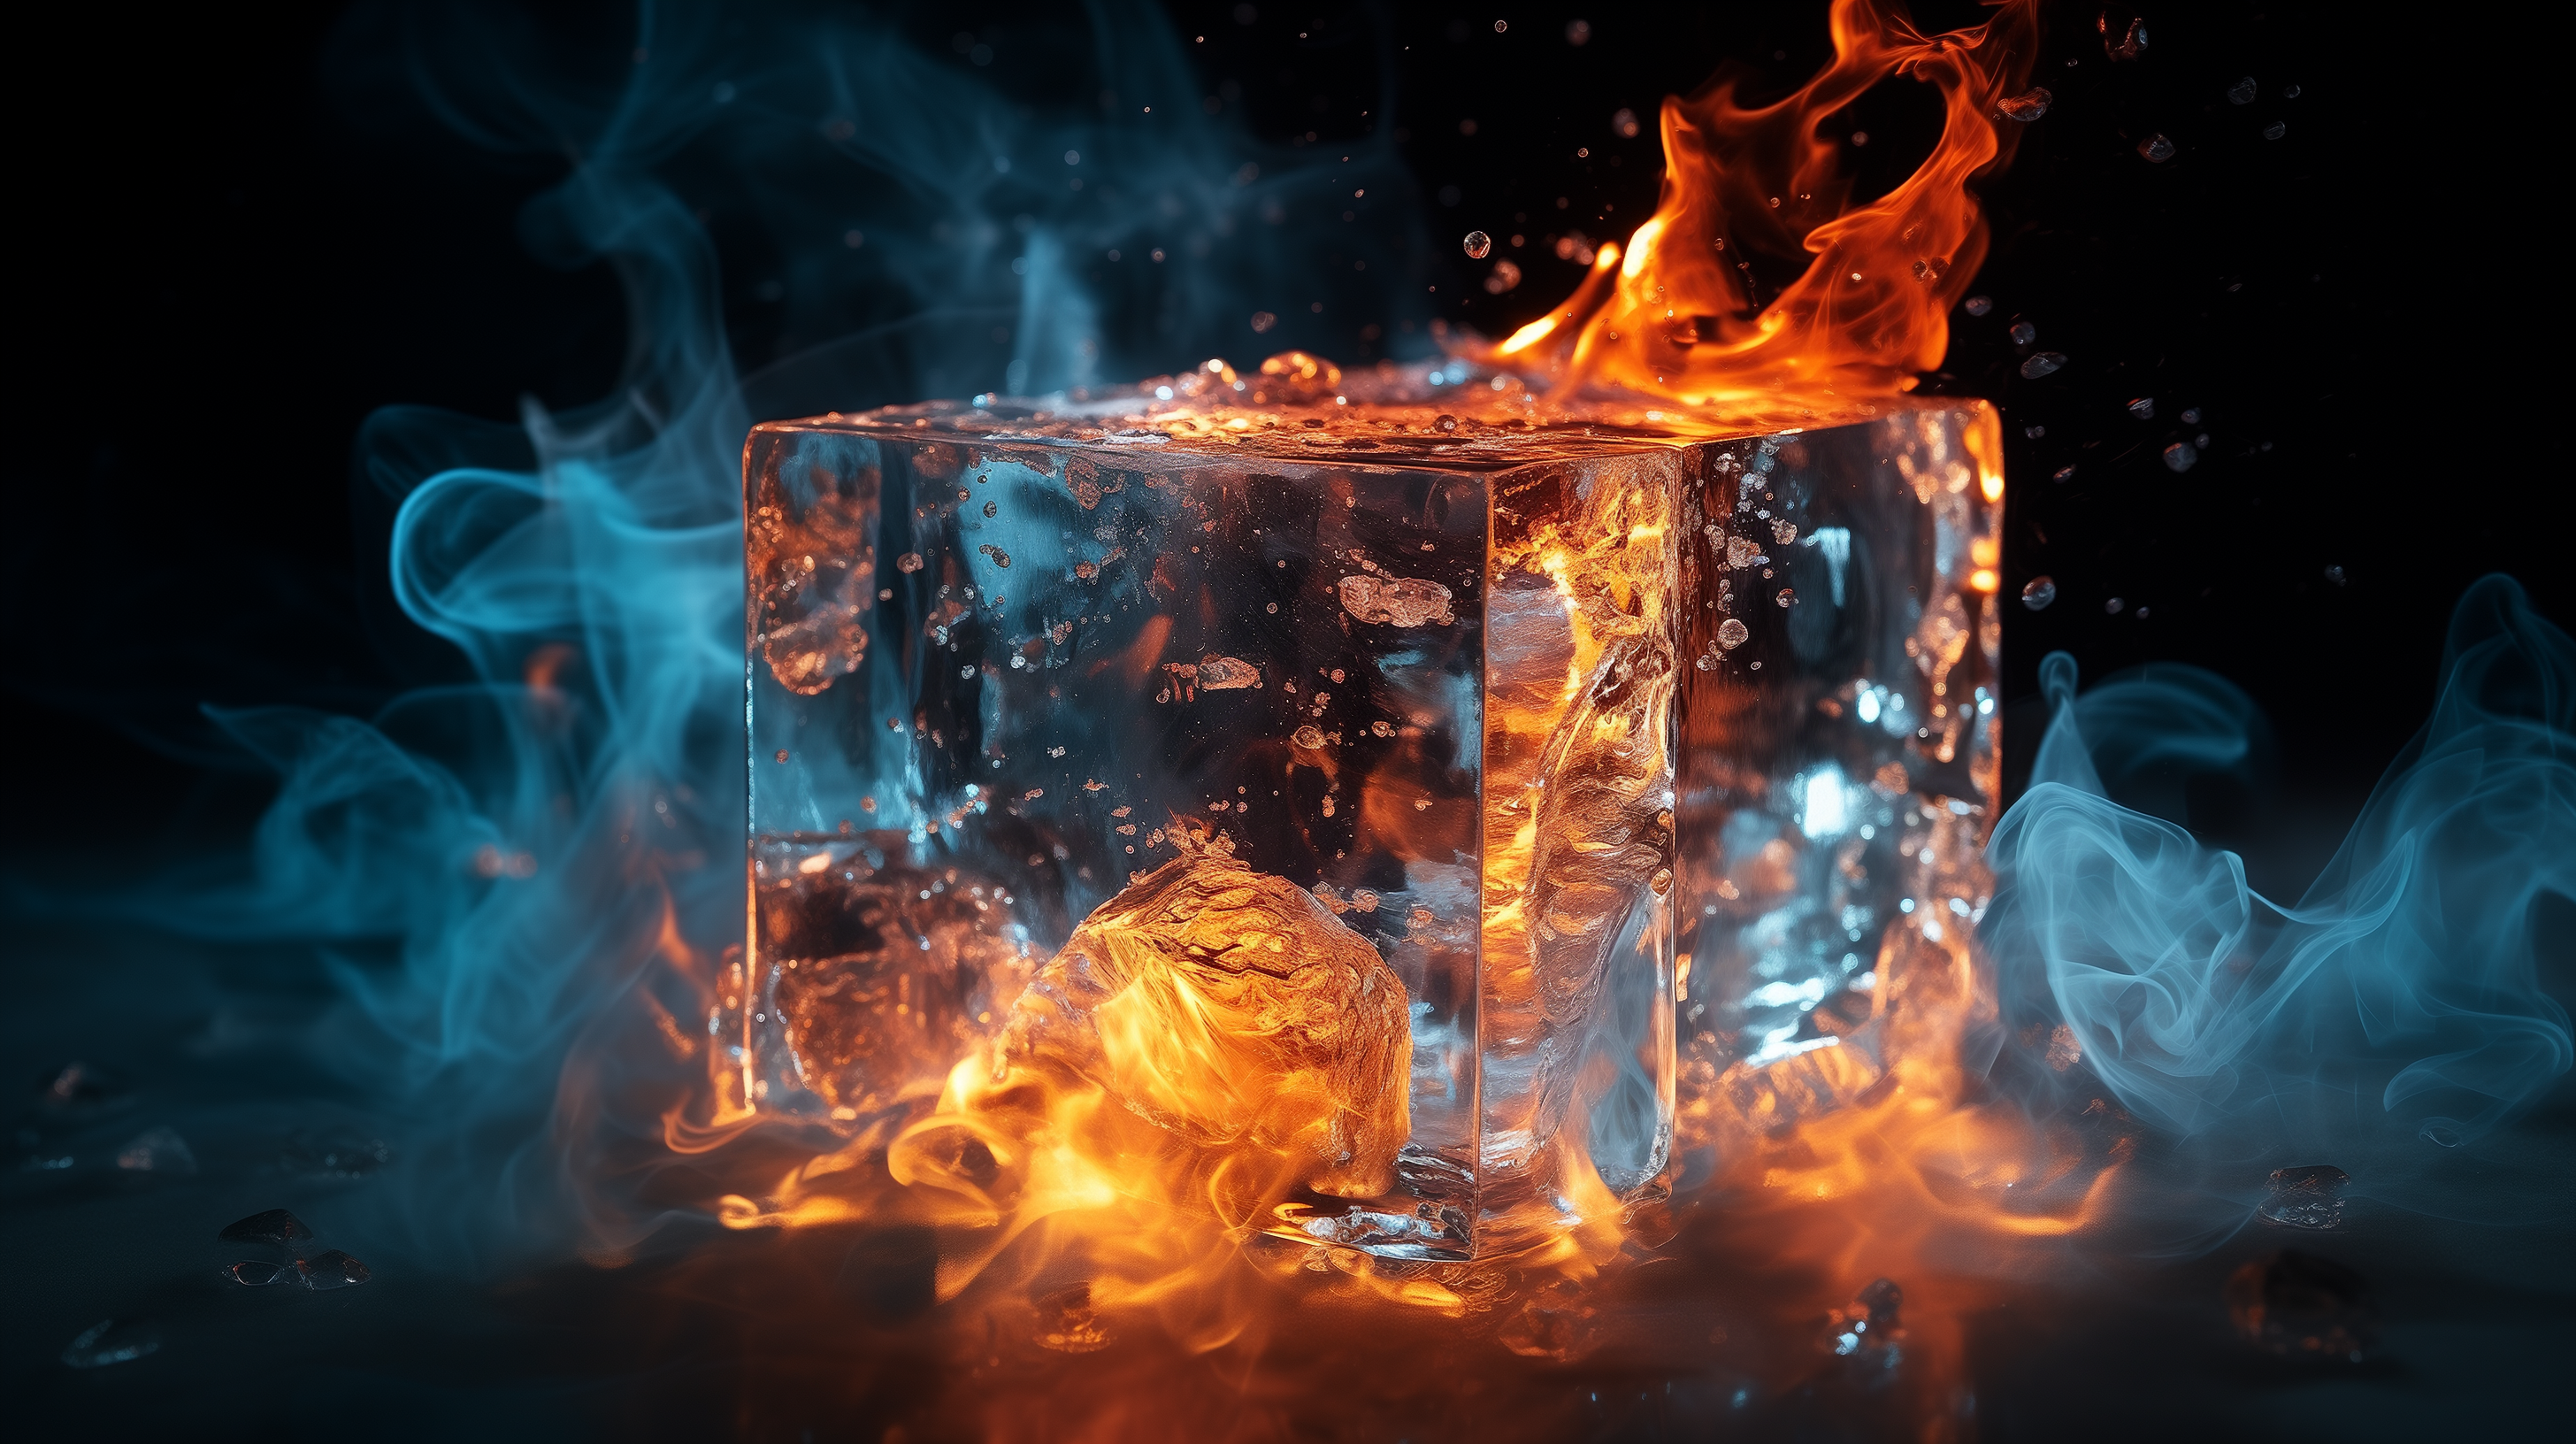 HD Wallpaper of Ice Cube Engulfed in Flames with Blue Smoke on Black Background.